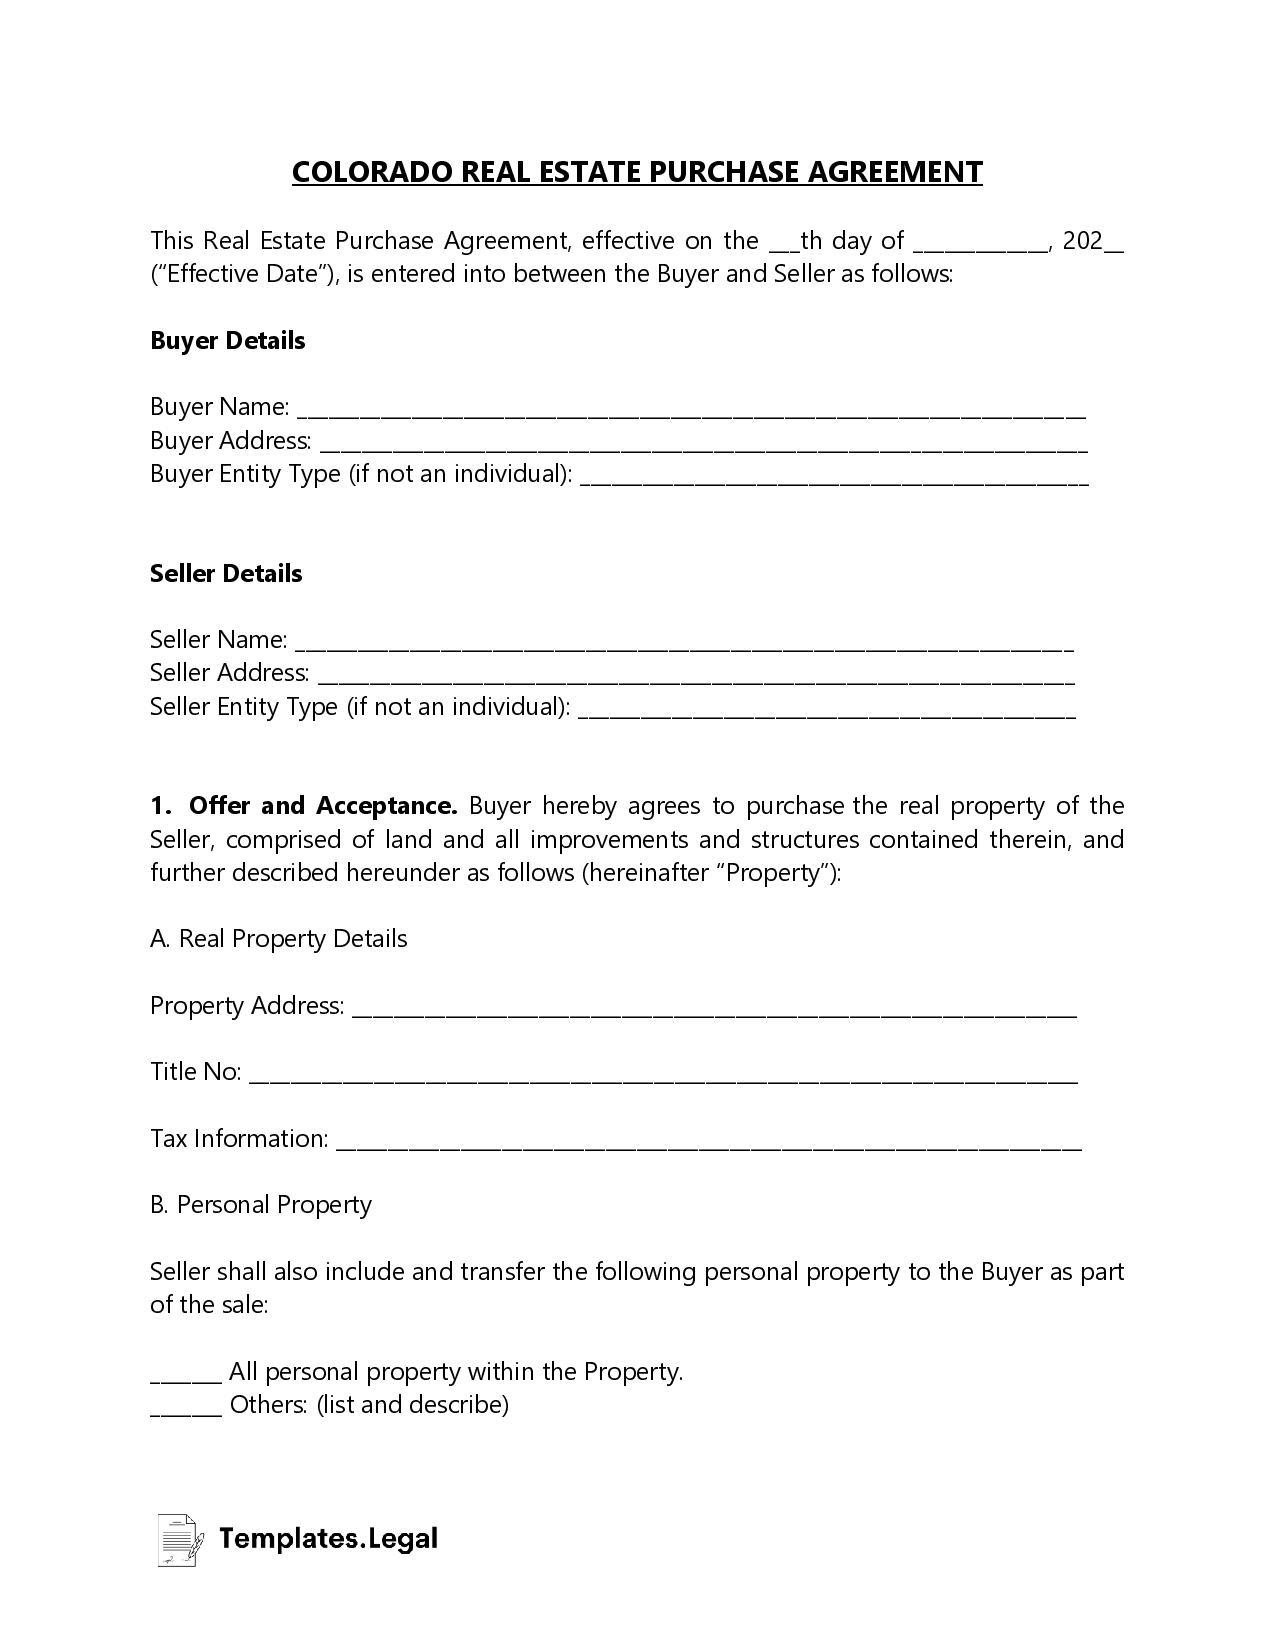 Colorado Real Estate Purchase Agreement - Templates.Legal